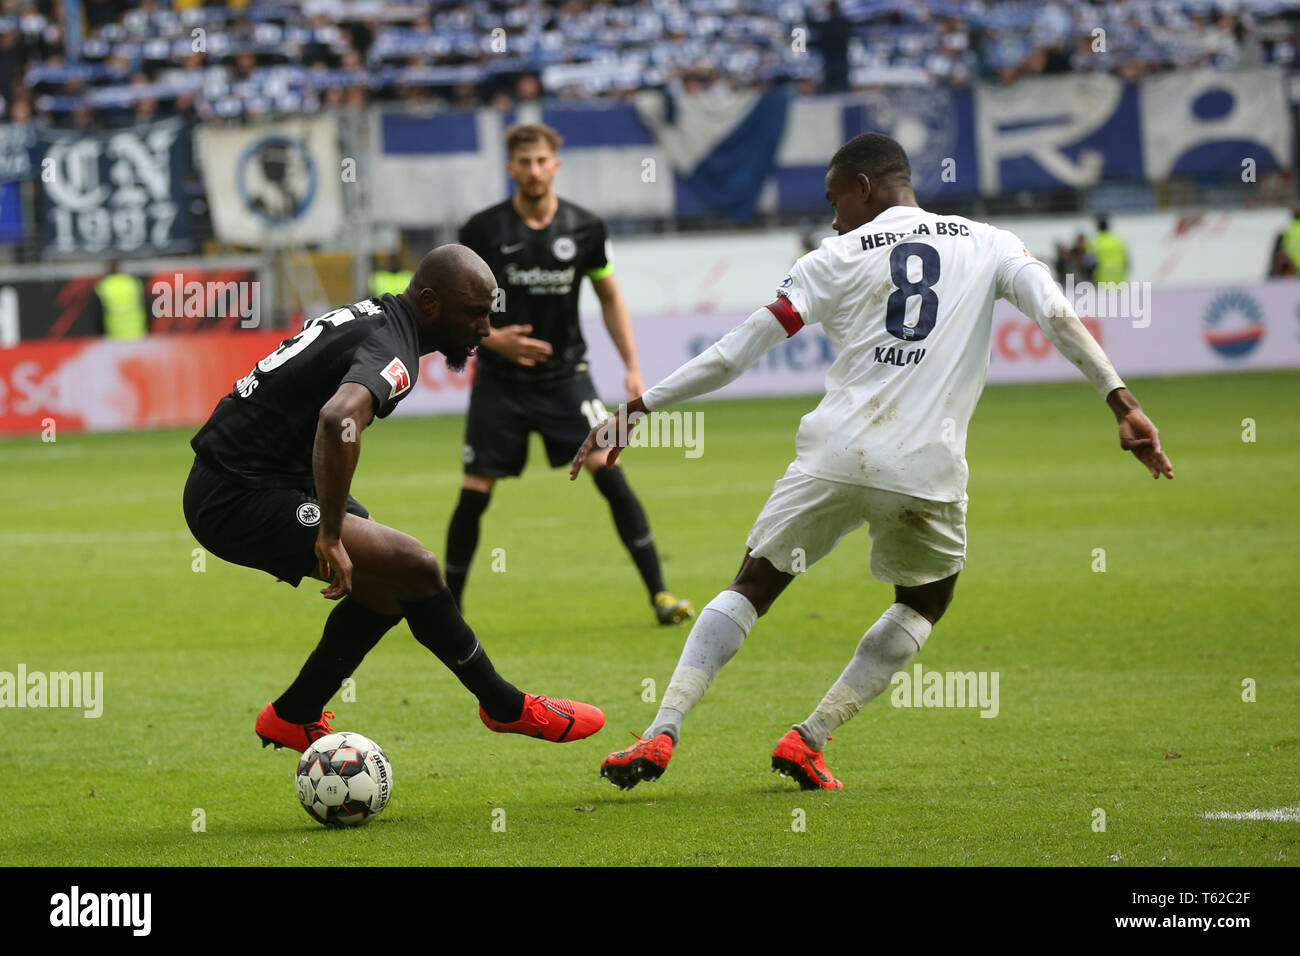 27 April 2019, Hessen, Frankfurt/M.: Soccer: Bundesliga, Eintracht Frankfurt - Hertha BSC, 31st matchday in the Commerzbank Arena. Berlin's Salomon Kalou (r) and Frankfurt's Jetro Willems fight for the ball. Photo: Thomas Frey/dpa - IMPORTANT NOTE: In accordance with the requirements of the DFL Deutsche Fußball Liga or the DFB Deutscher Fußball-Bund, it is prohibited to use or have used photographs taken in the stadium and/or the match in the form of sequence images and/or video-like photo sequences. Stock Photo